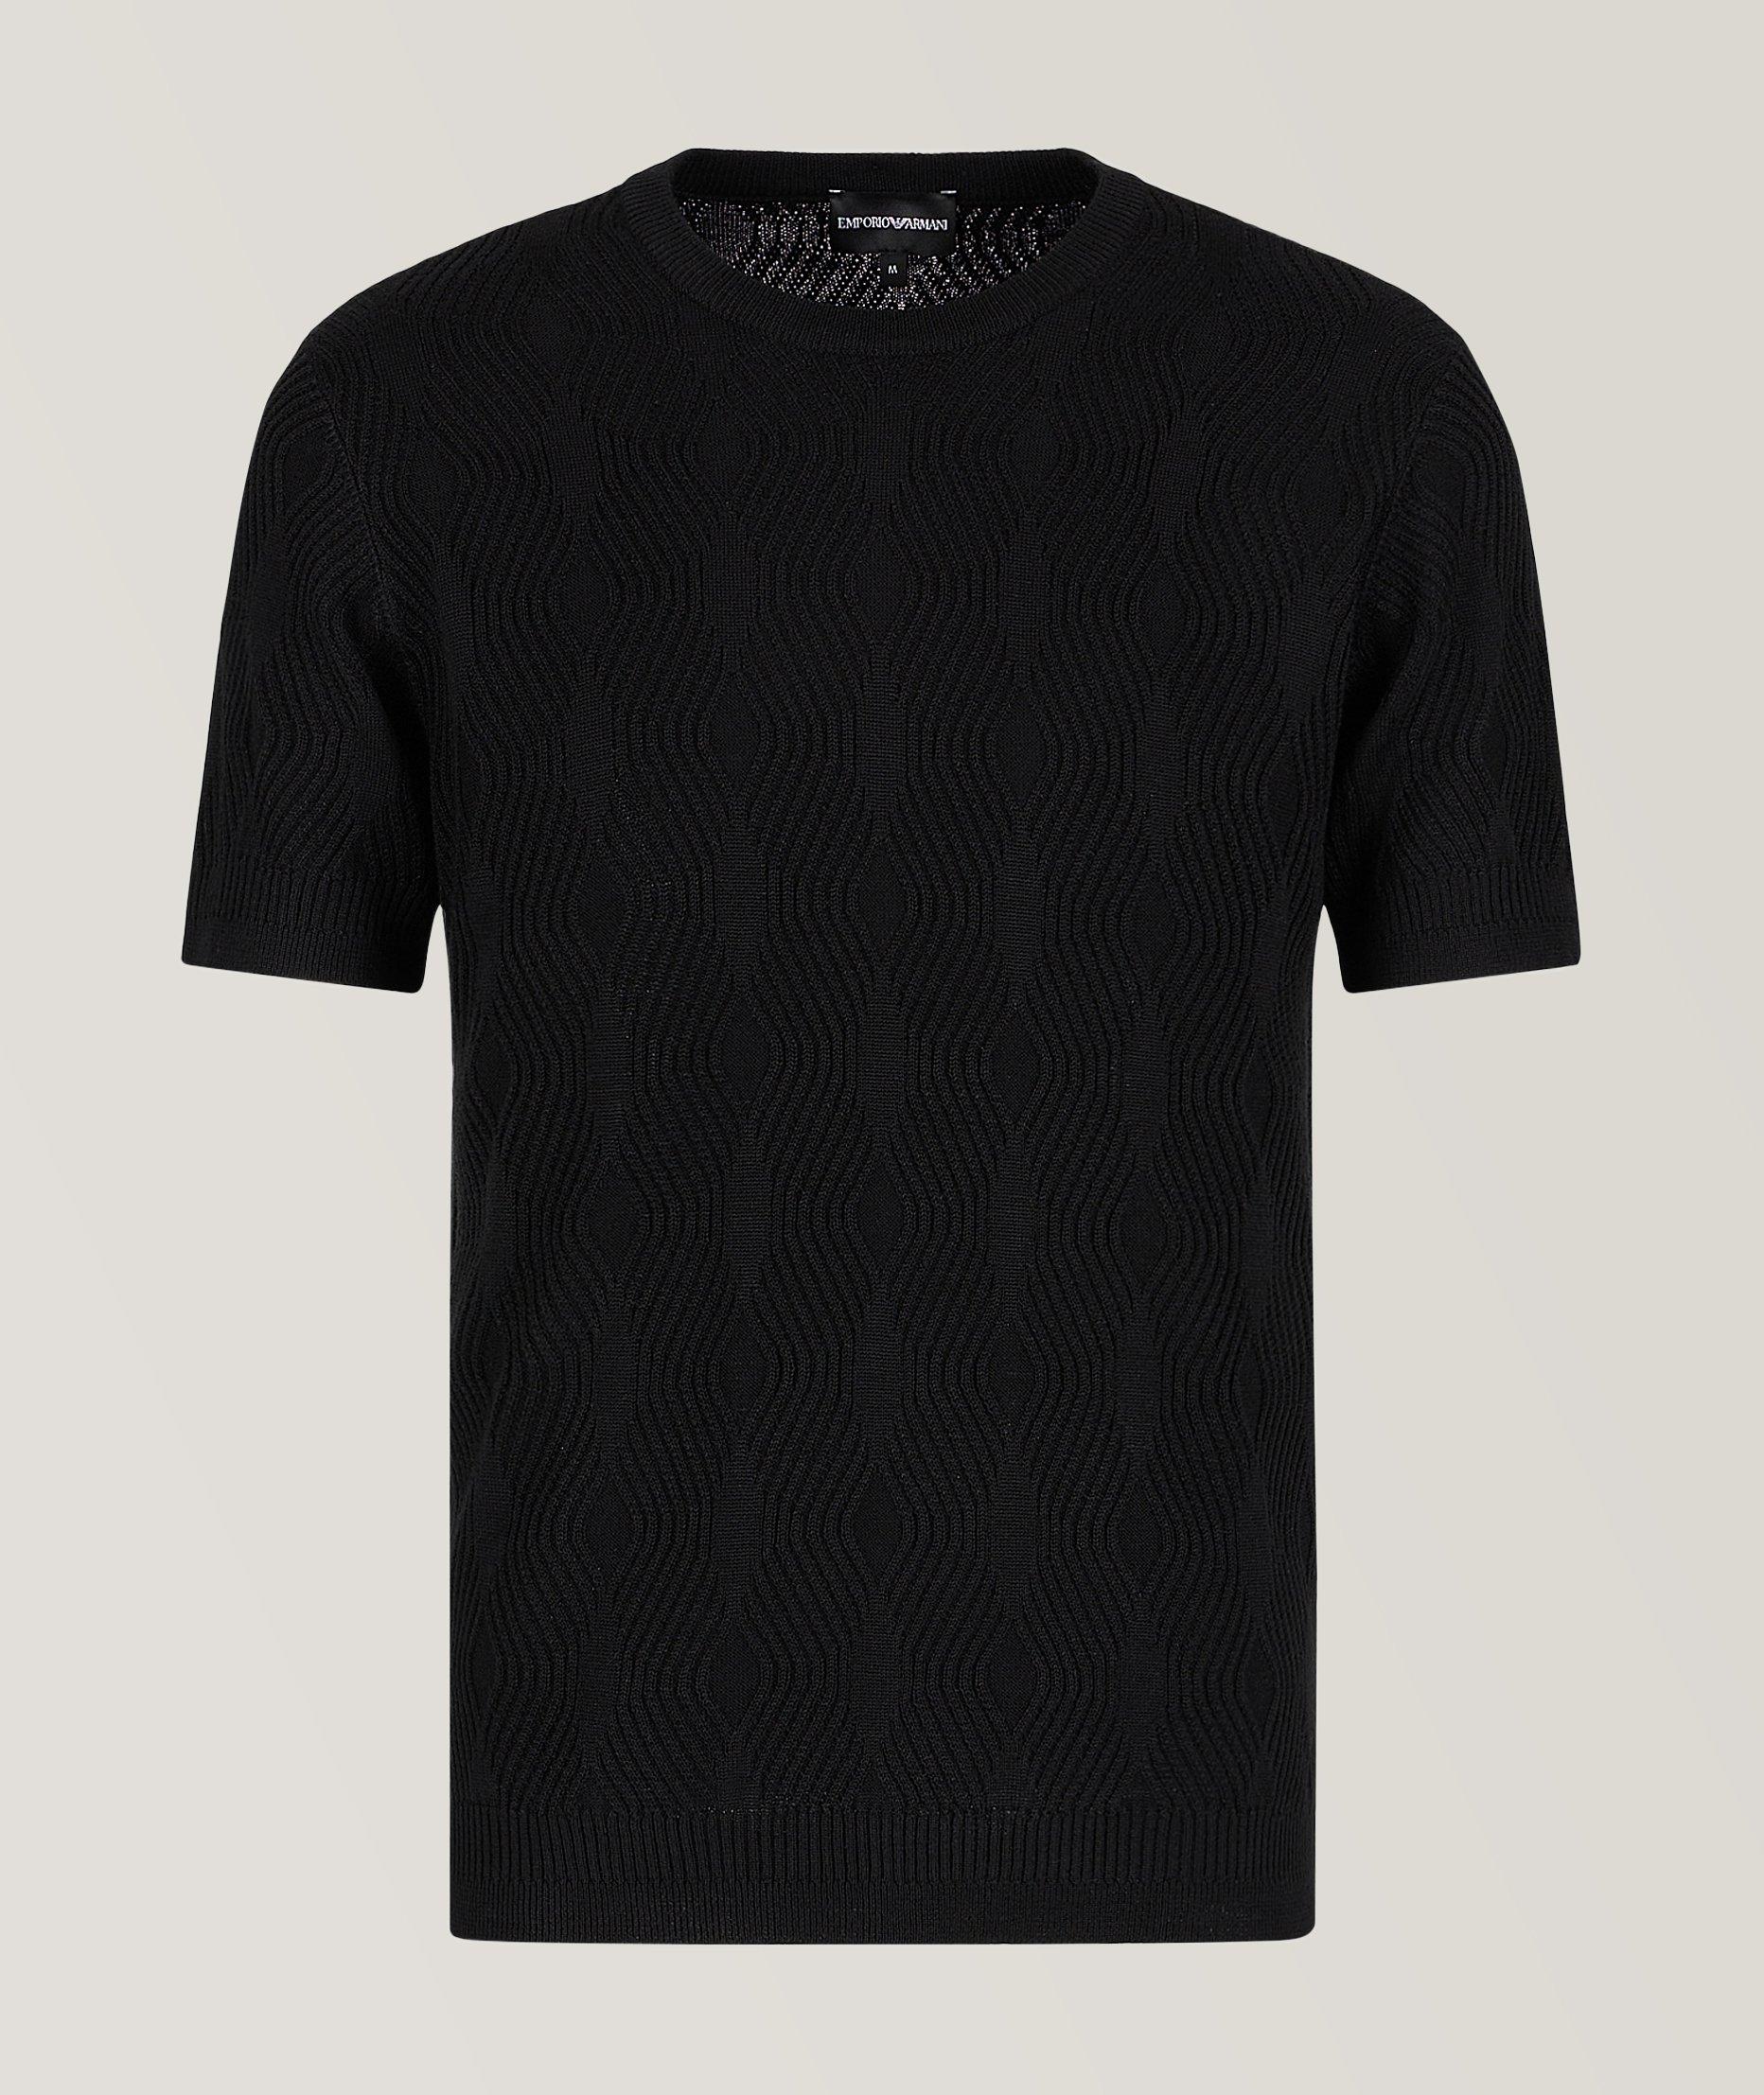 Emporio Armani All-Over Wavy Knit Wool-Blend Shirt | Sweaters & Knits ...